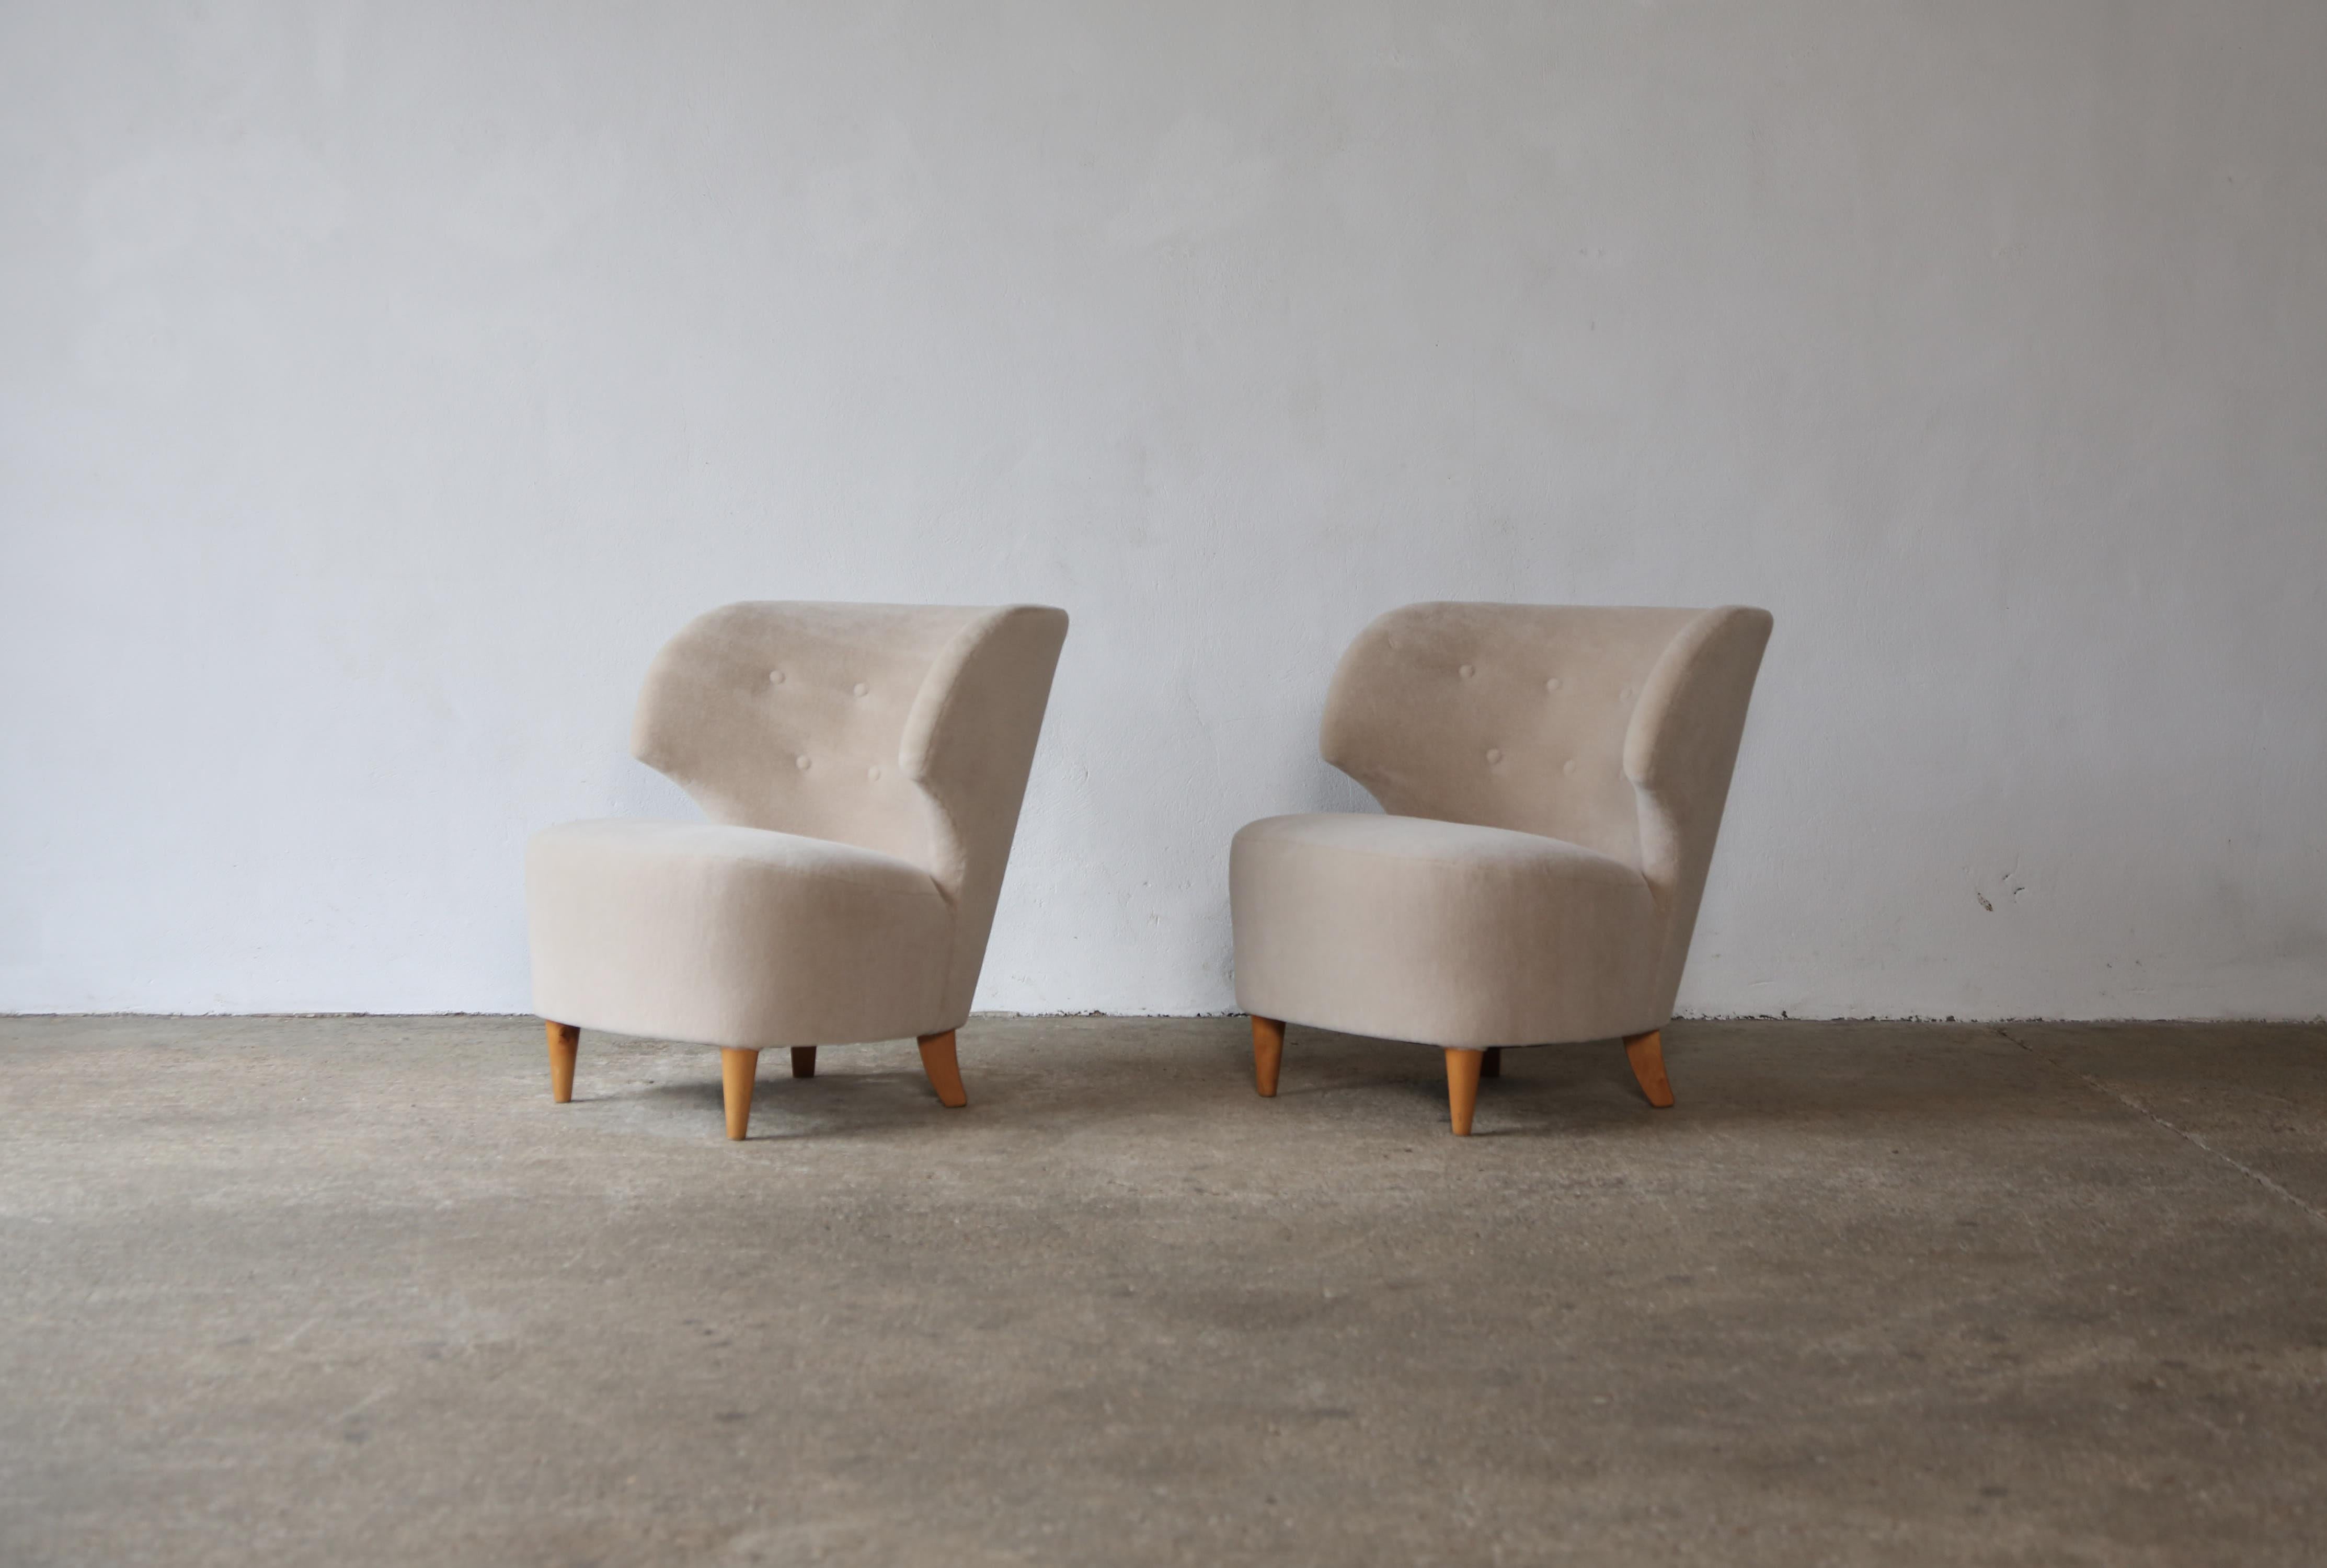 Pair of Carl-Johan Boman Chairs, Finland, 1940s, Newly Upholstered in Alpaca For Sale 3